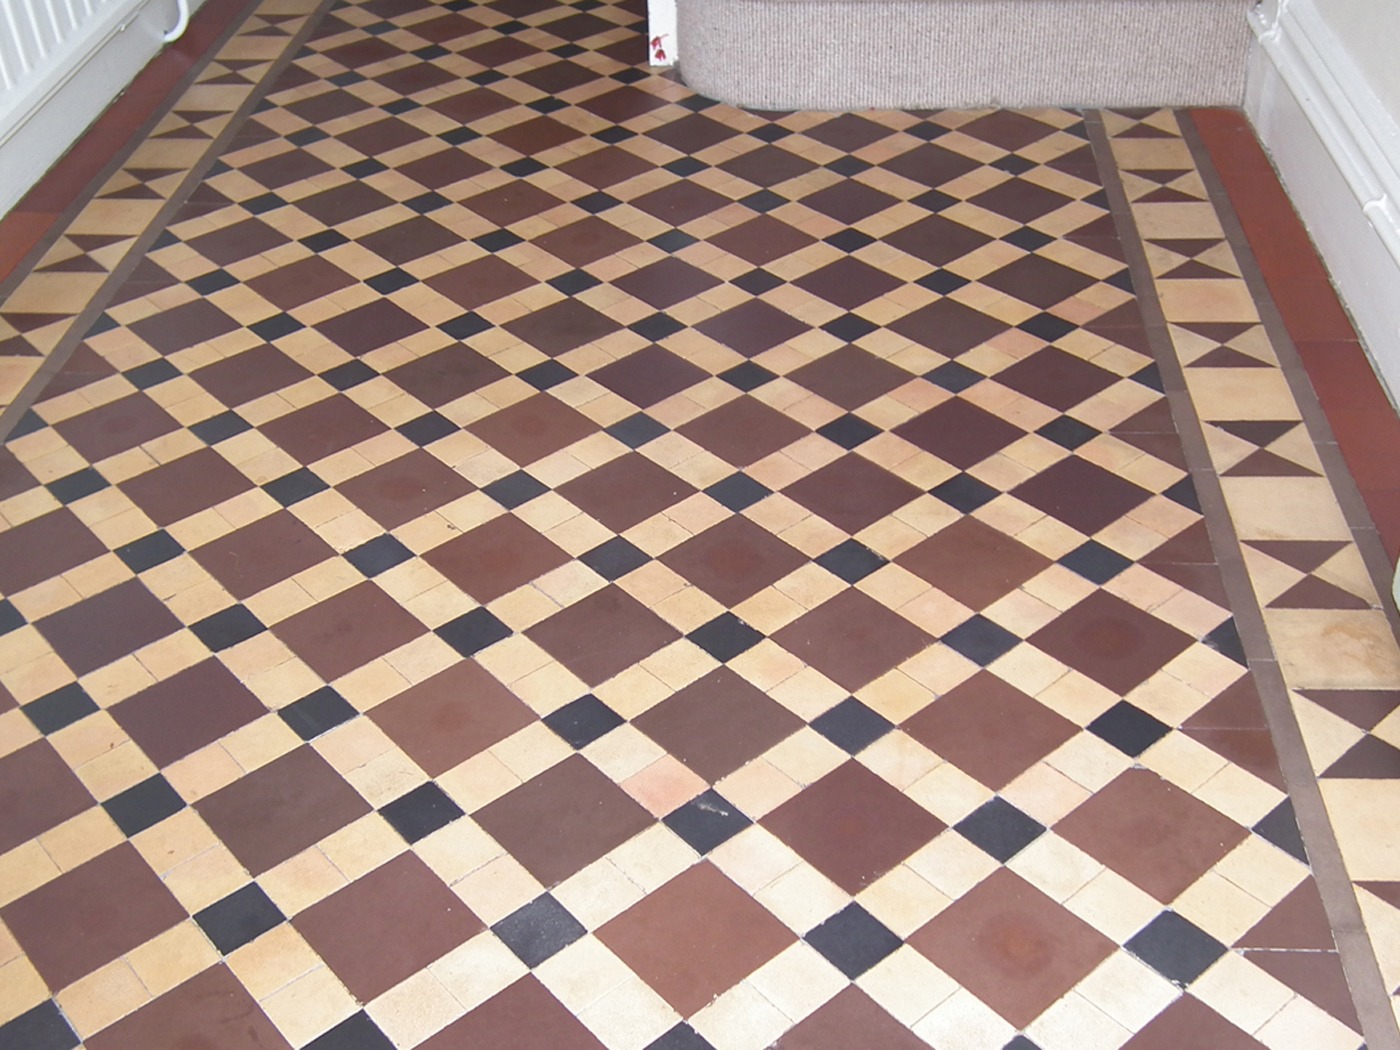 Mosaic Floor Tile Extensions to Existing Installations